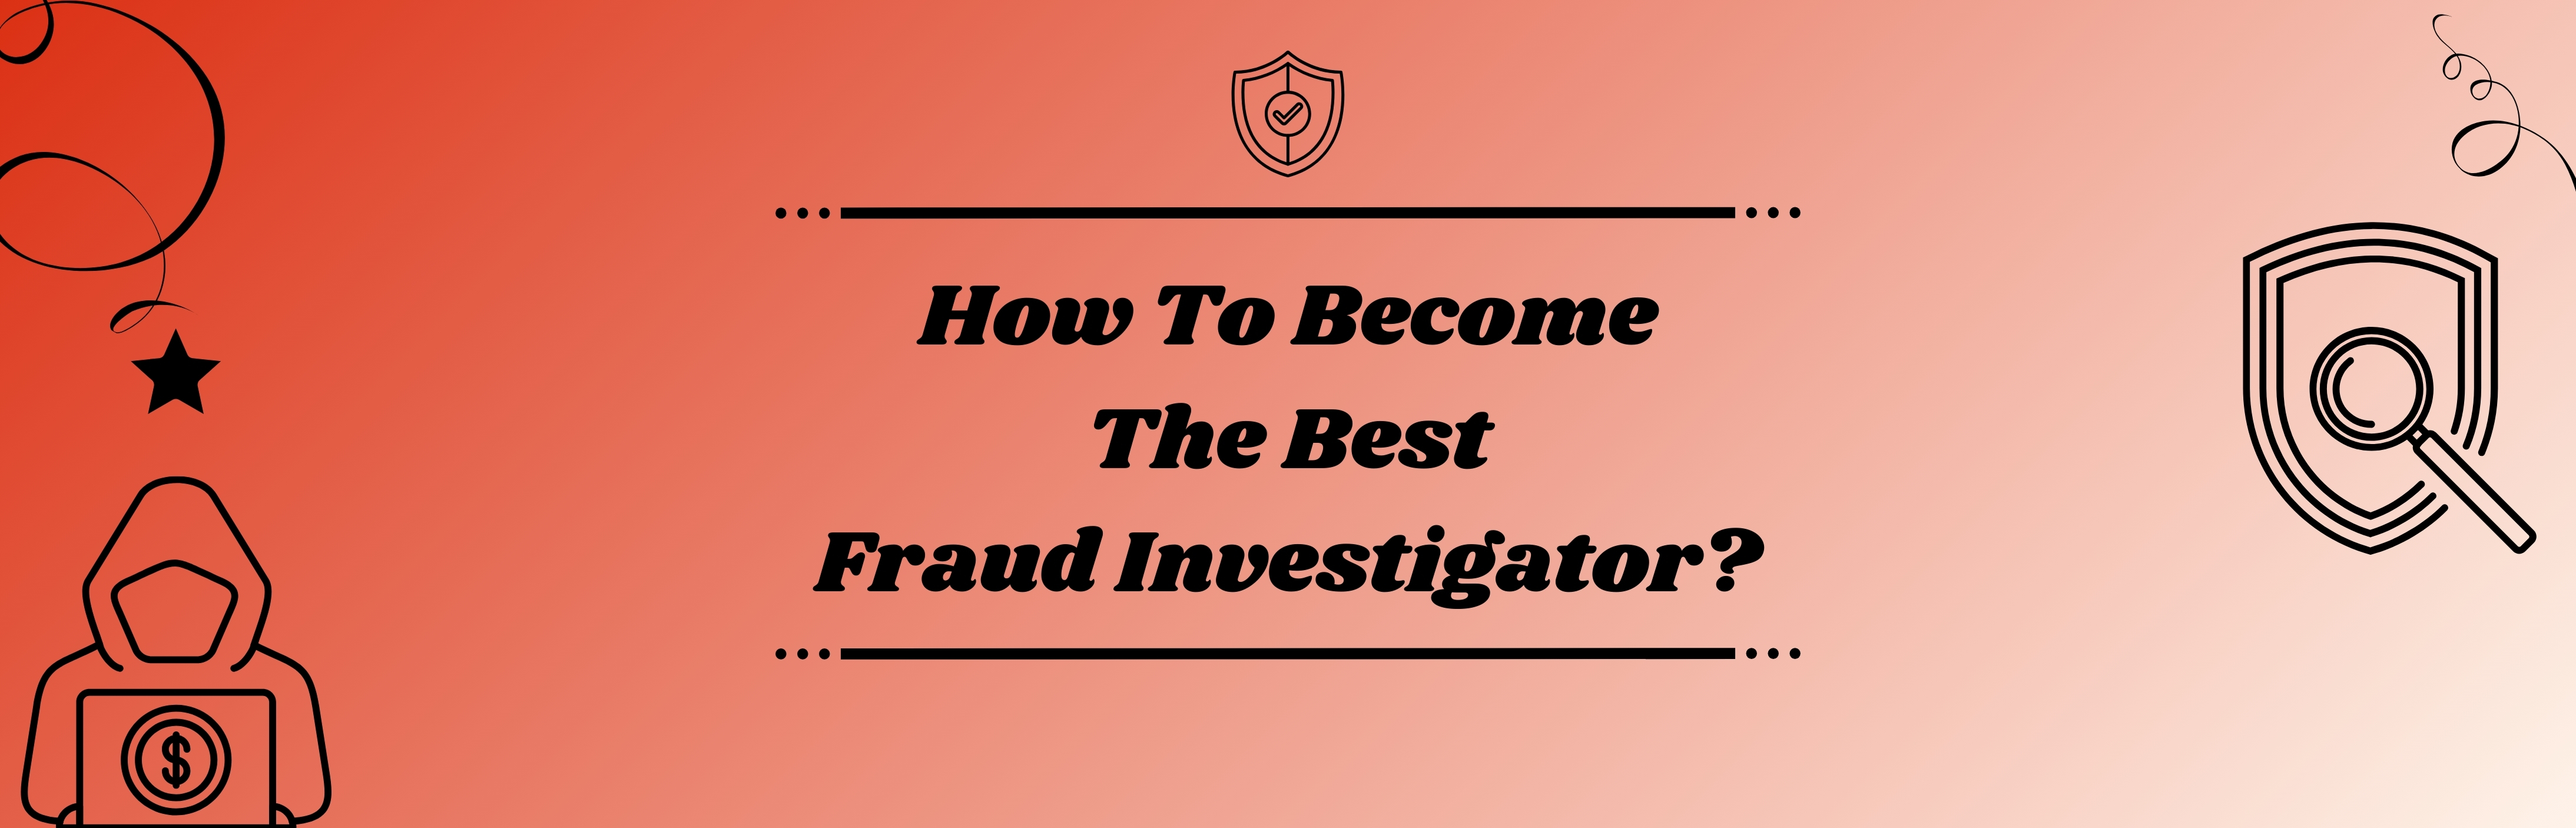 How To Become The Best Fraud Investigator